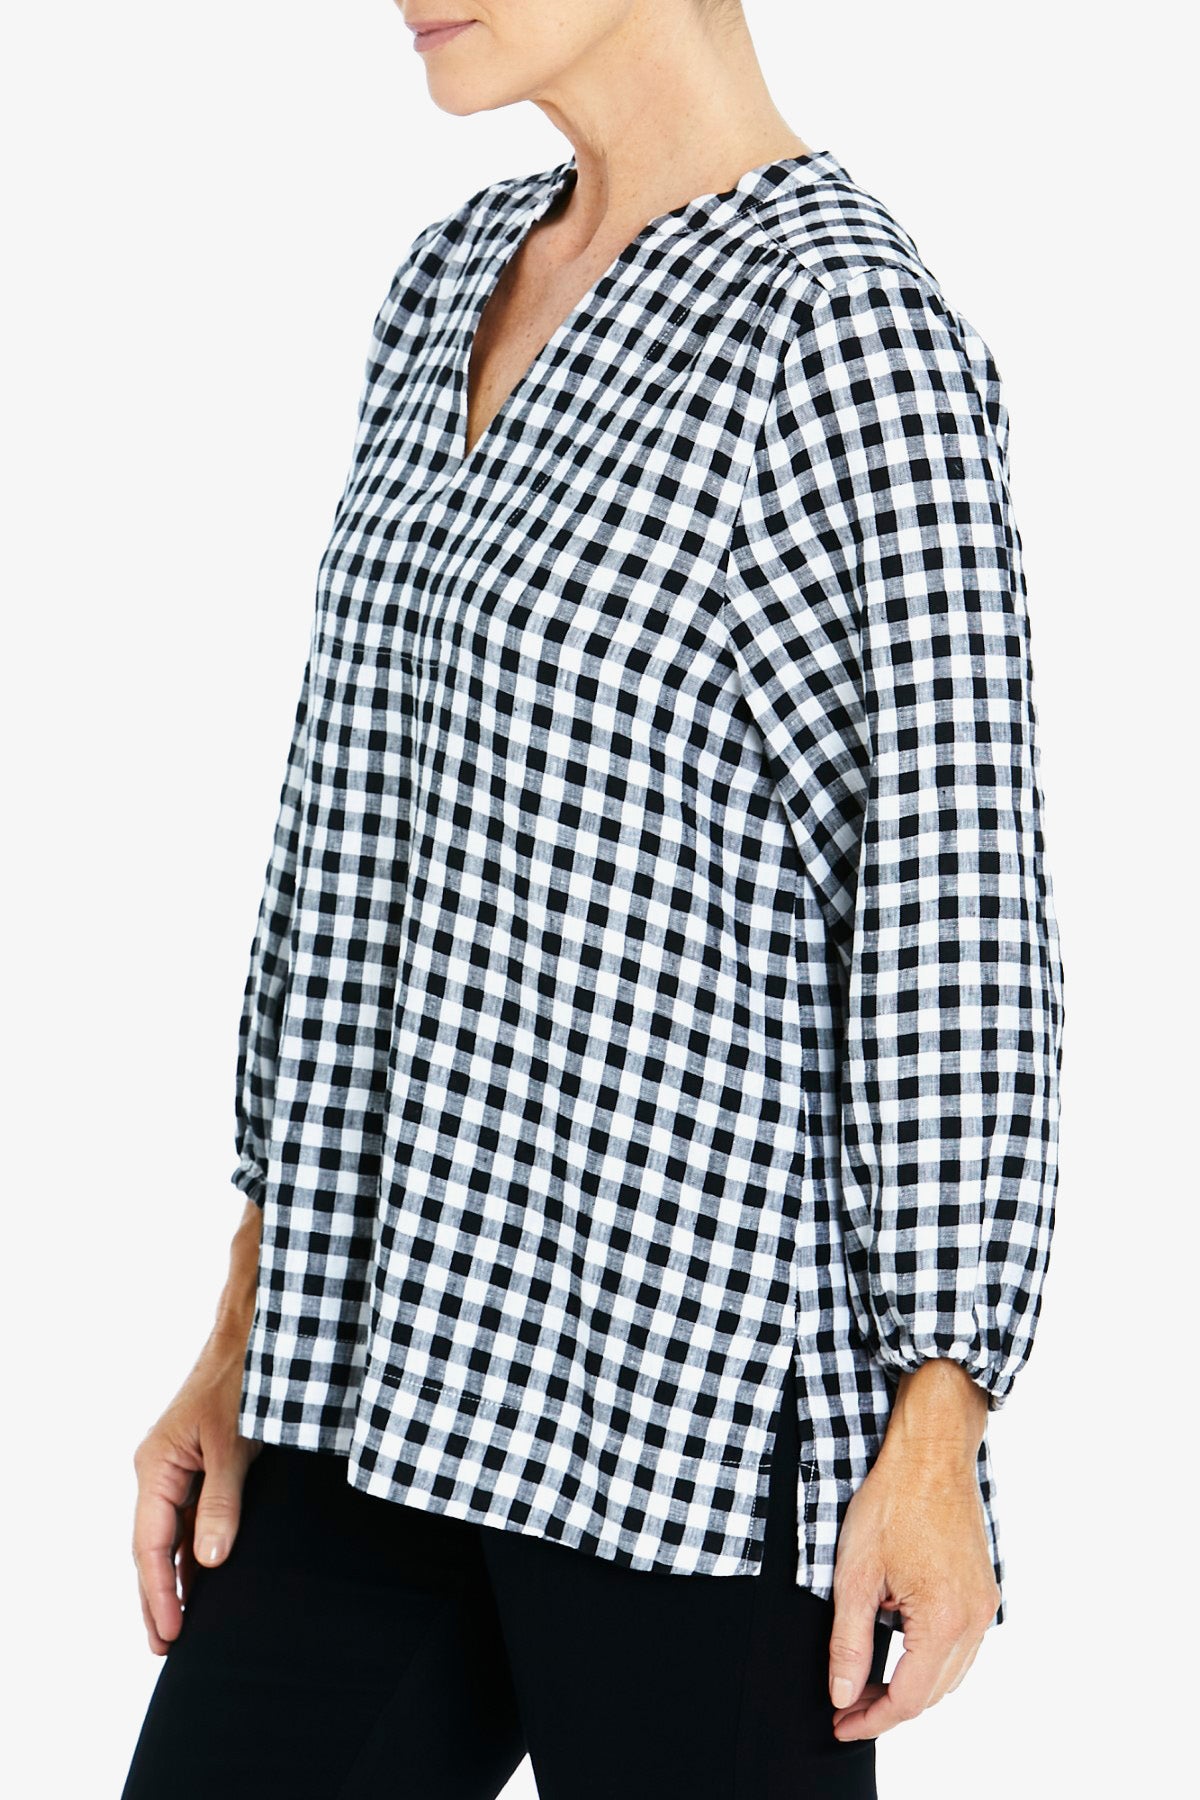 3/4 Sleeve Gingham Blouse Black and White